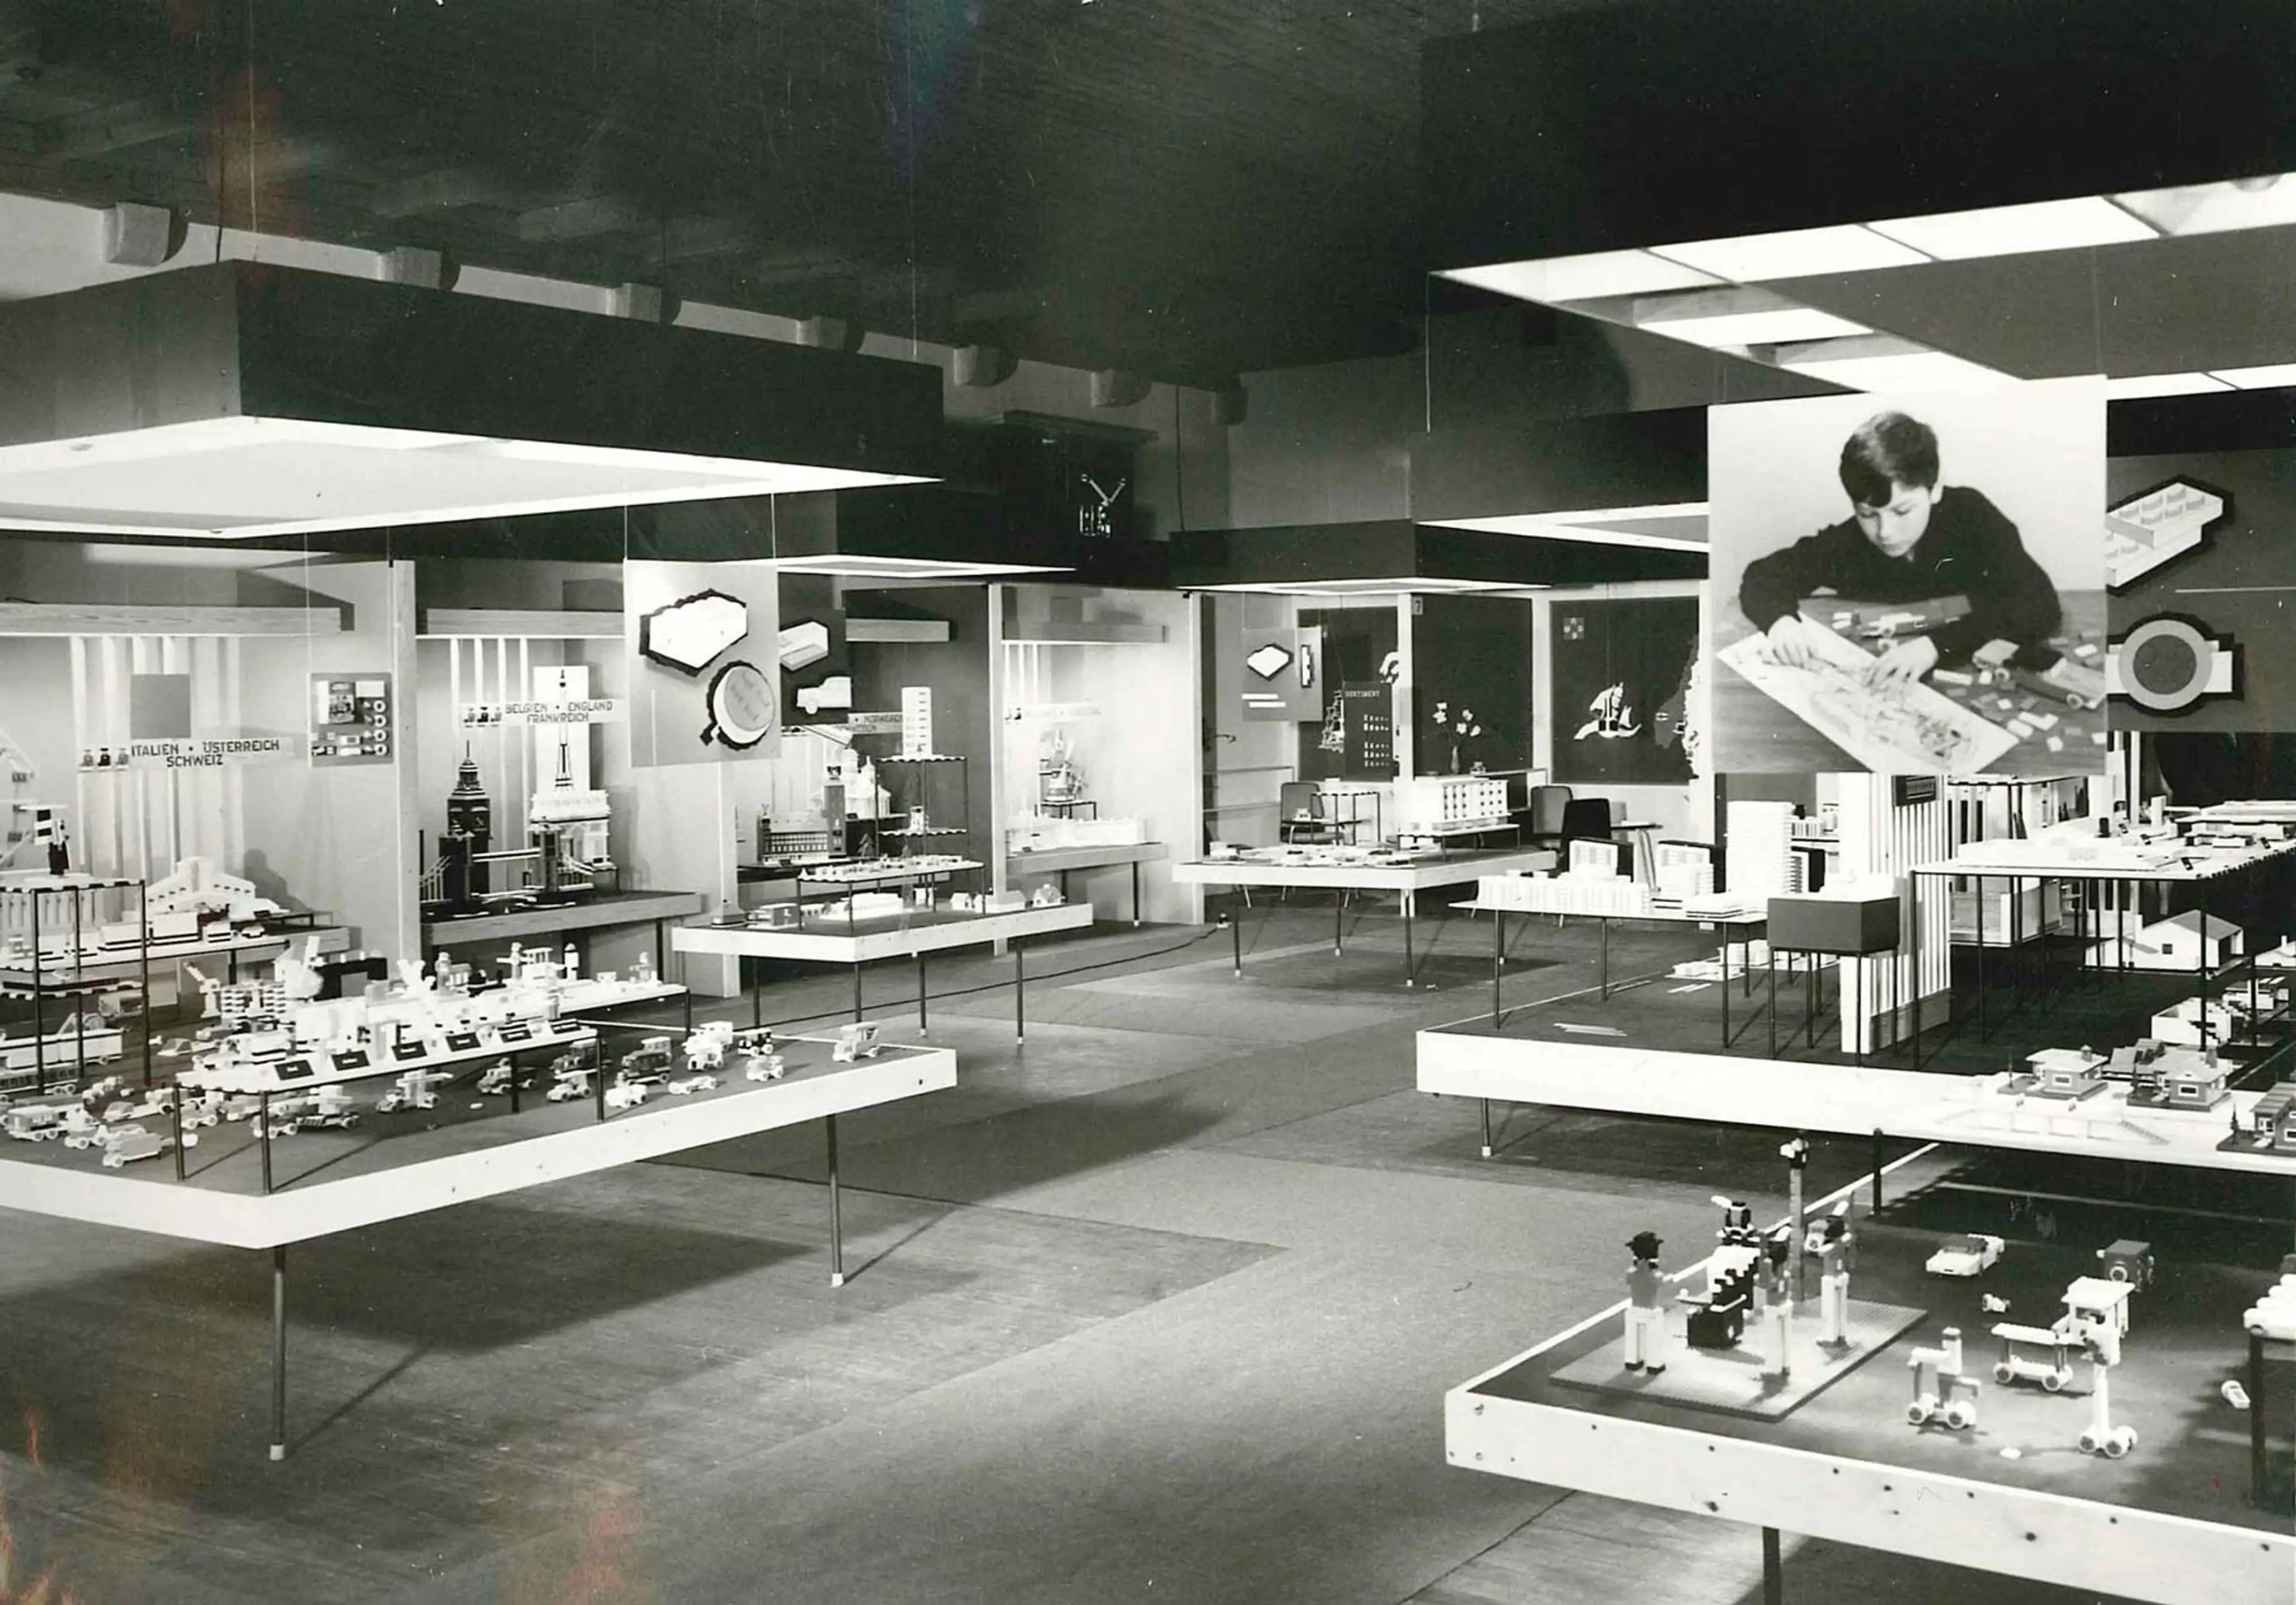 overview of the LEGO exhibition at the Nuremberg fair in 1962